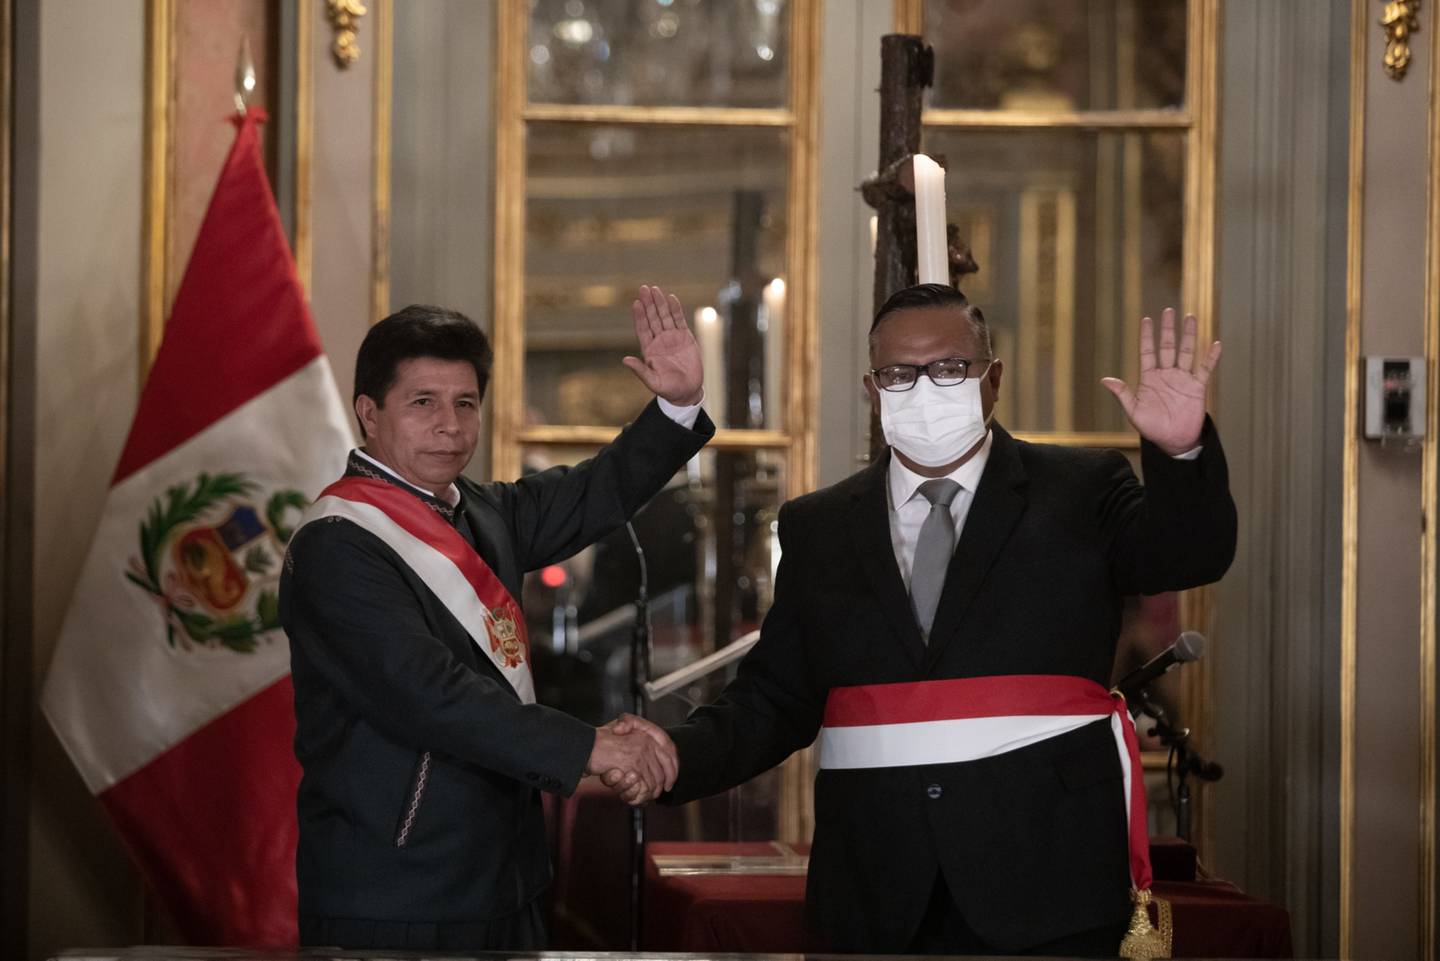 Pedro Castillo, Peru's president, left, shakes hands with Hernan Yuri Condori Machado, Peru's new minister of health, during a swearing-in ceremony at the Government Palace in Lima, Peru, on Tuesday, Feb. 8, 2022. Castillo has repeatedly made changes to his cabinet since taking office, including naming his fourth prime minister in just over six months as he tries to restore stability after weeks of political turmoil. Photographer: Angela Ponce/Bloomberg